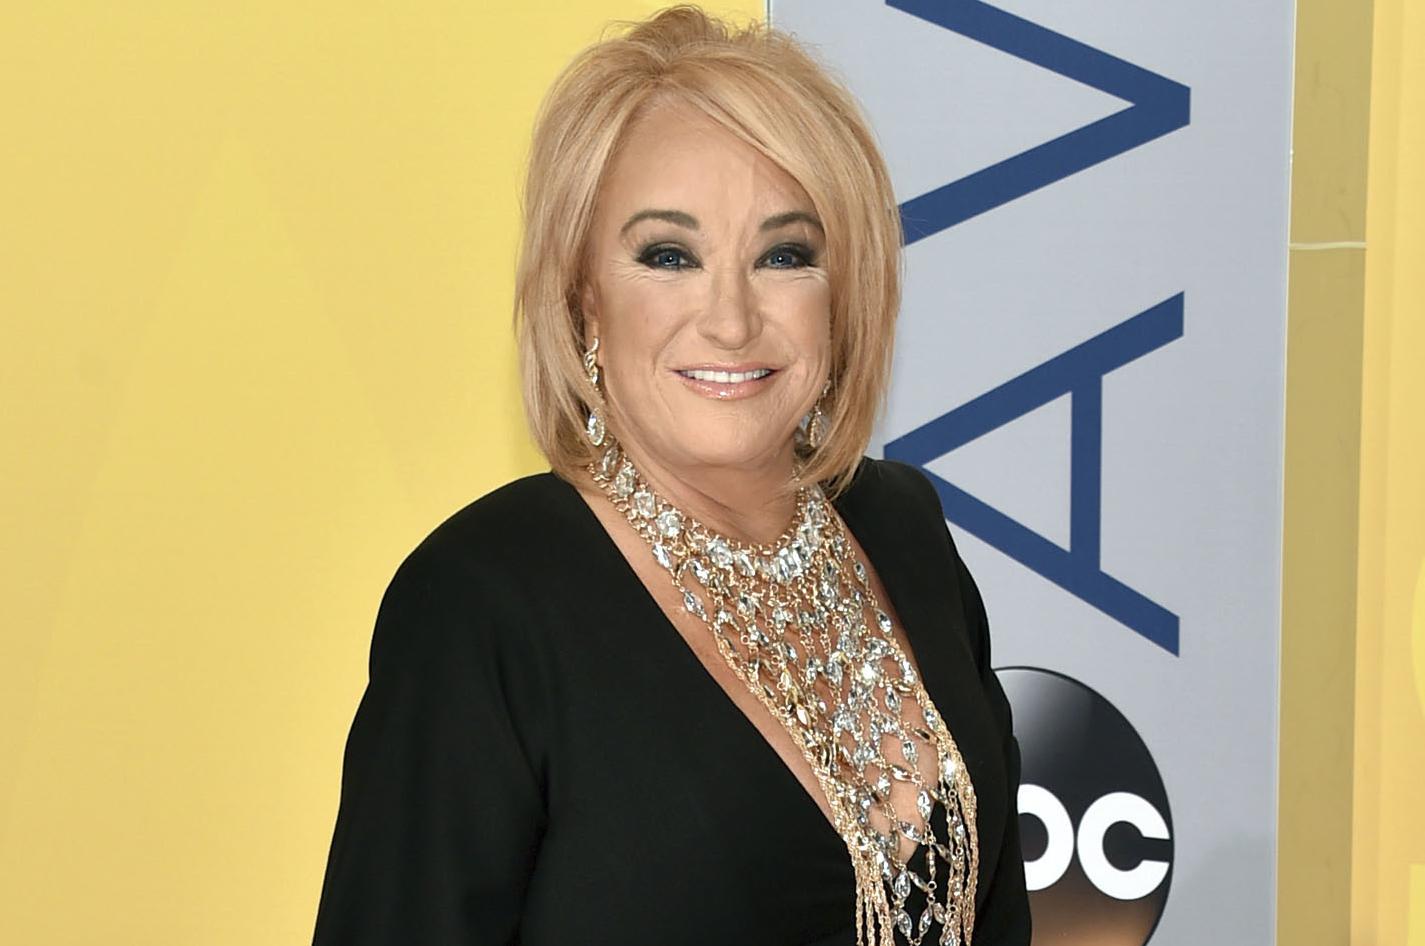 Country singer Tanya Tucker hospitalized after a fall | The Spokesman